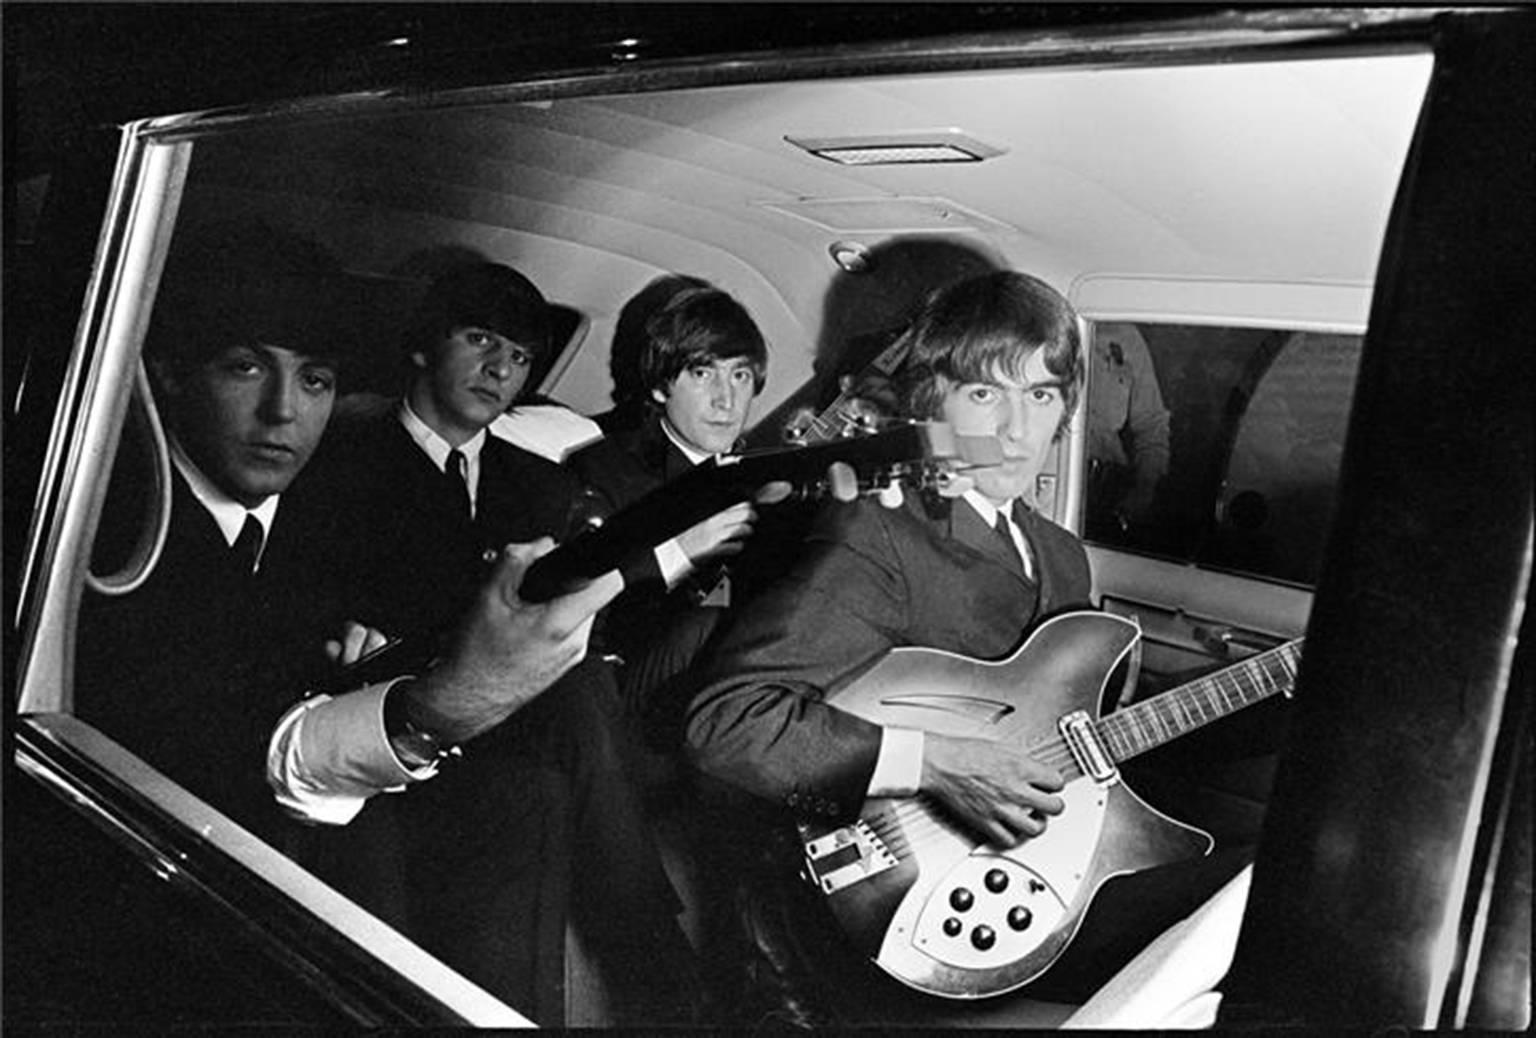 Curt Gunther Black and White Photograph - The Beatles in their Limo